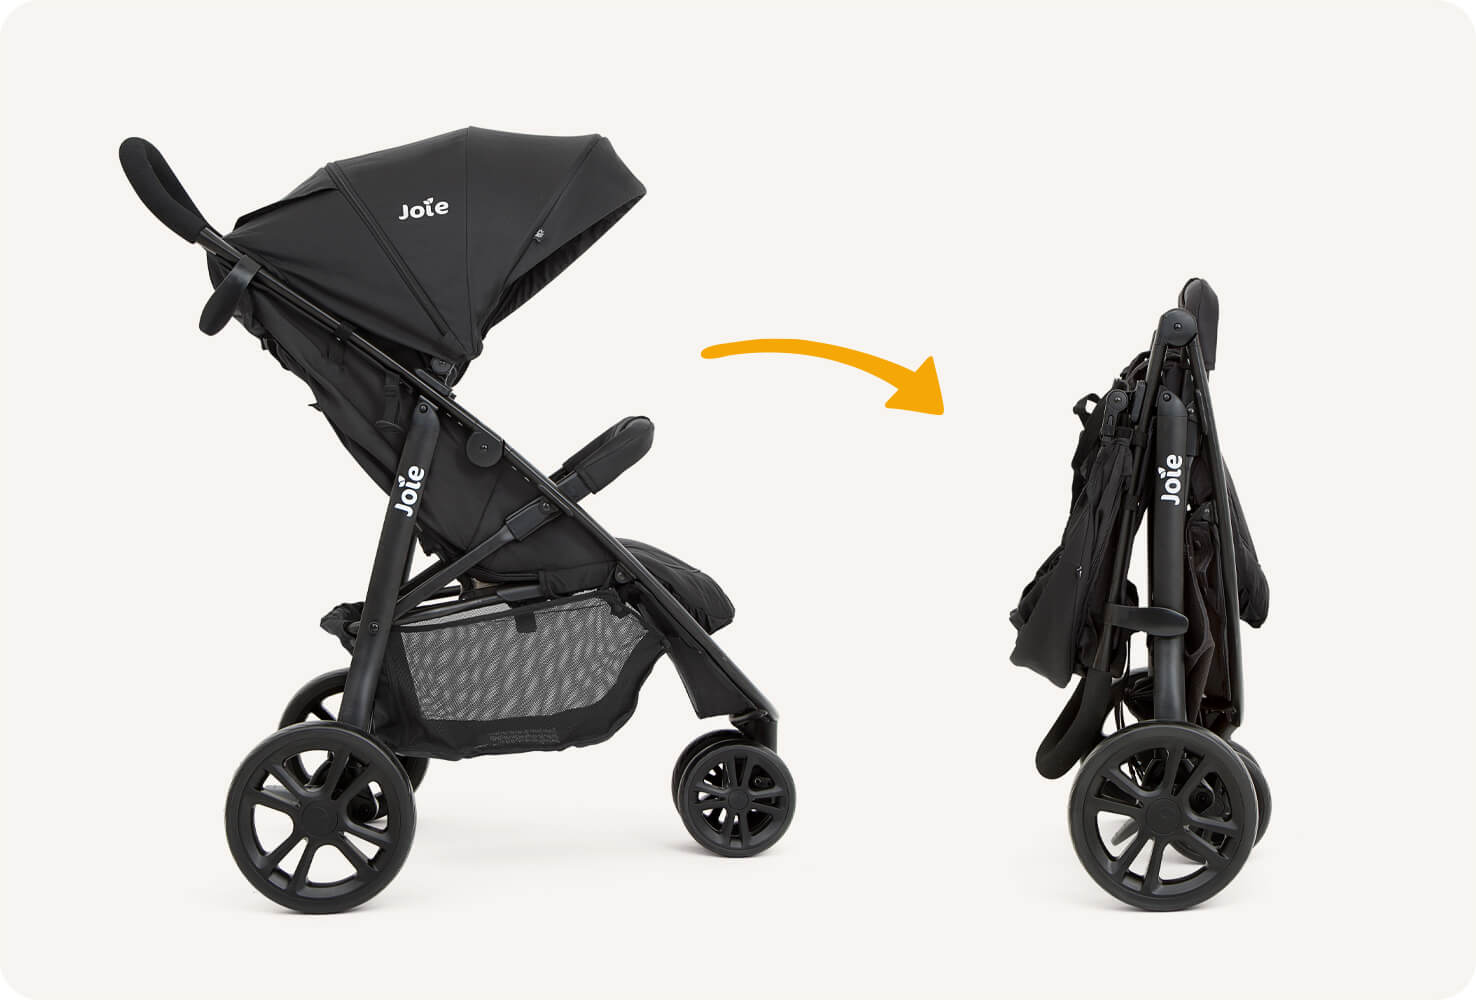   Joie litetrax 3 stroller folded at angle being held by a hand.